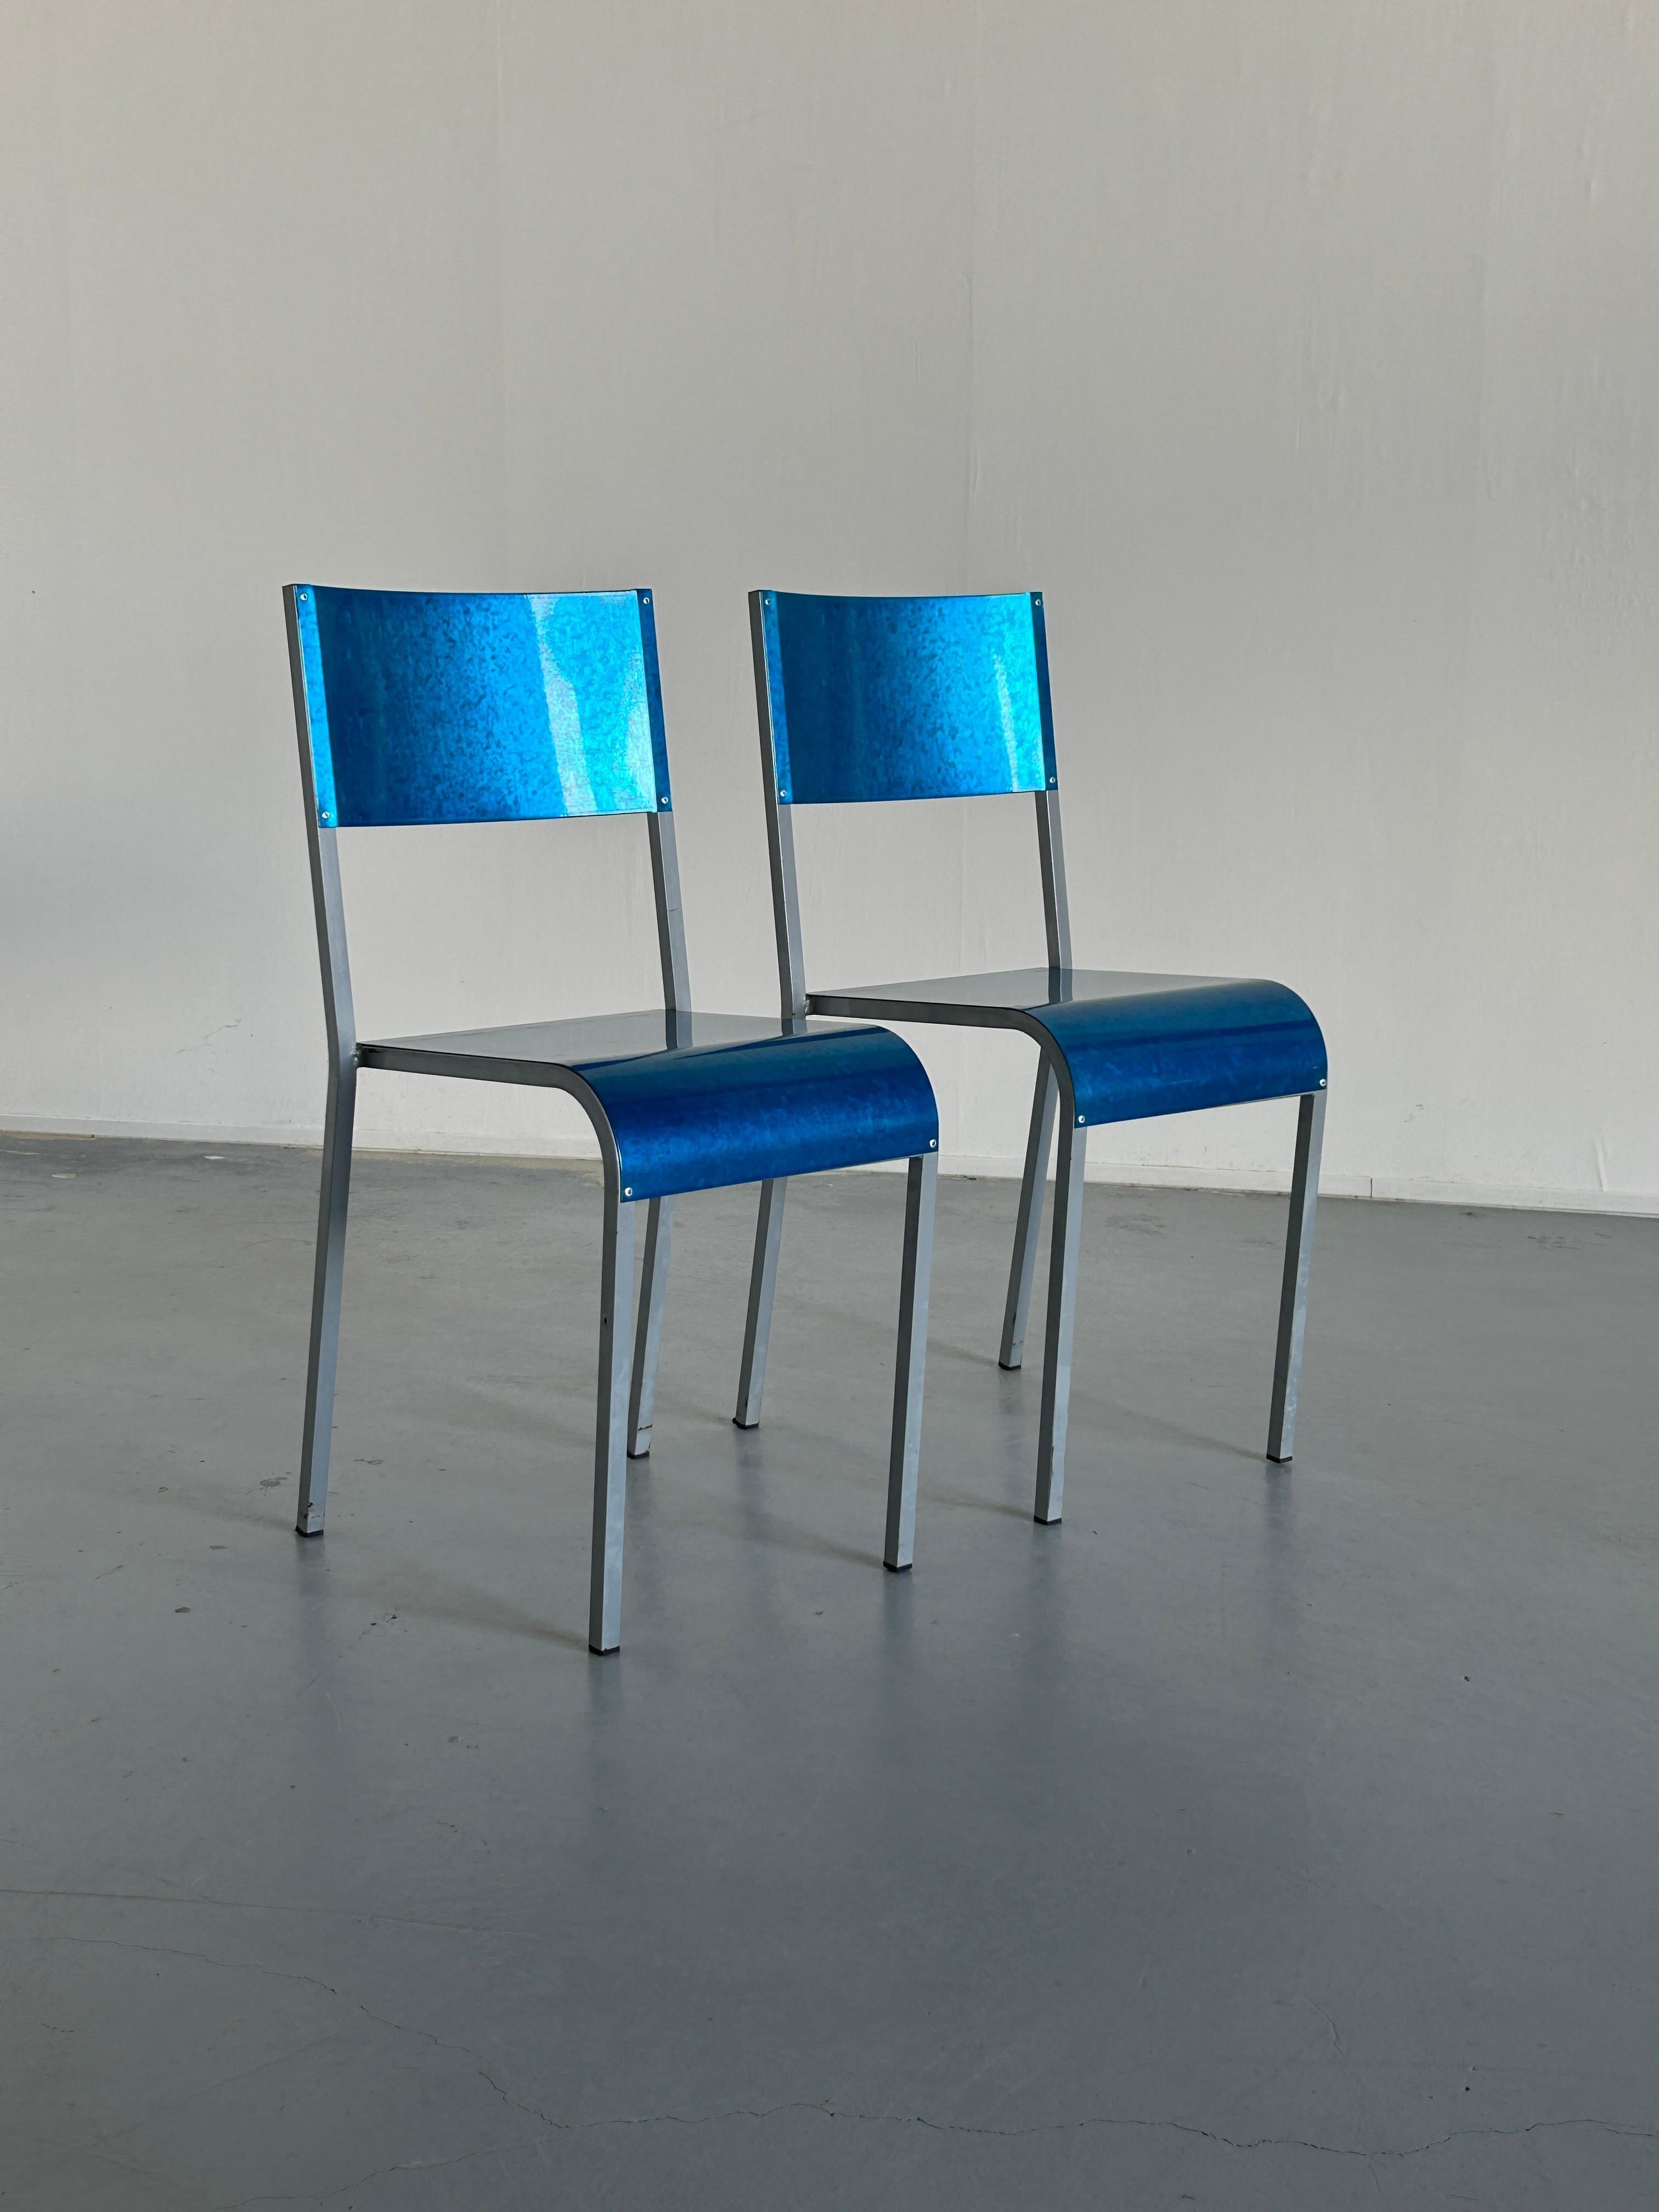 Post-Modern Pair of Blue Postmodern Industrial Metal Dining Chairs by Parisotto, 1980s Italy For Sale